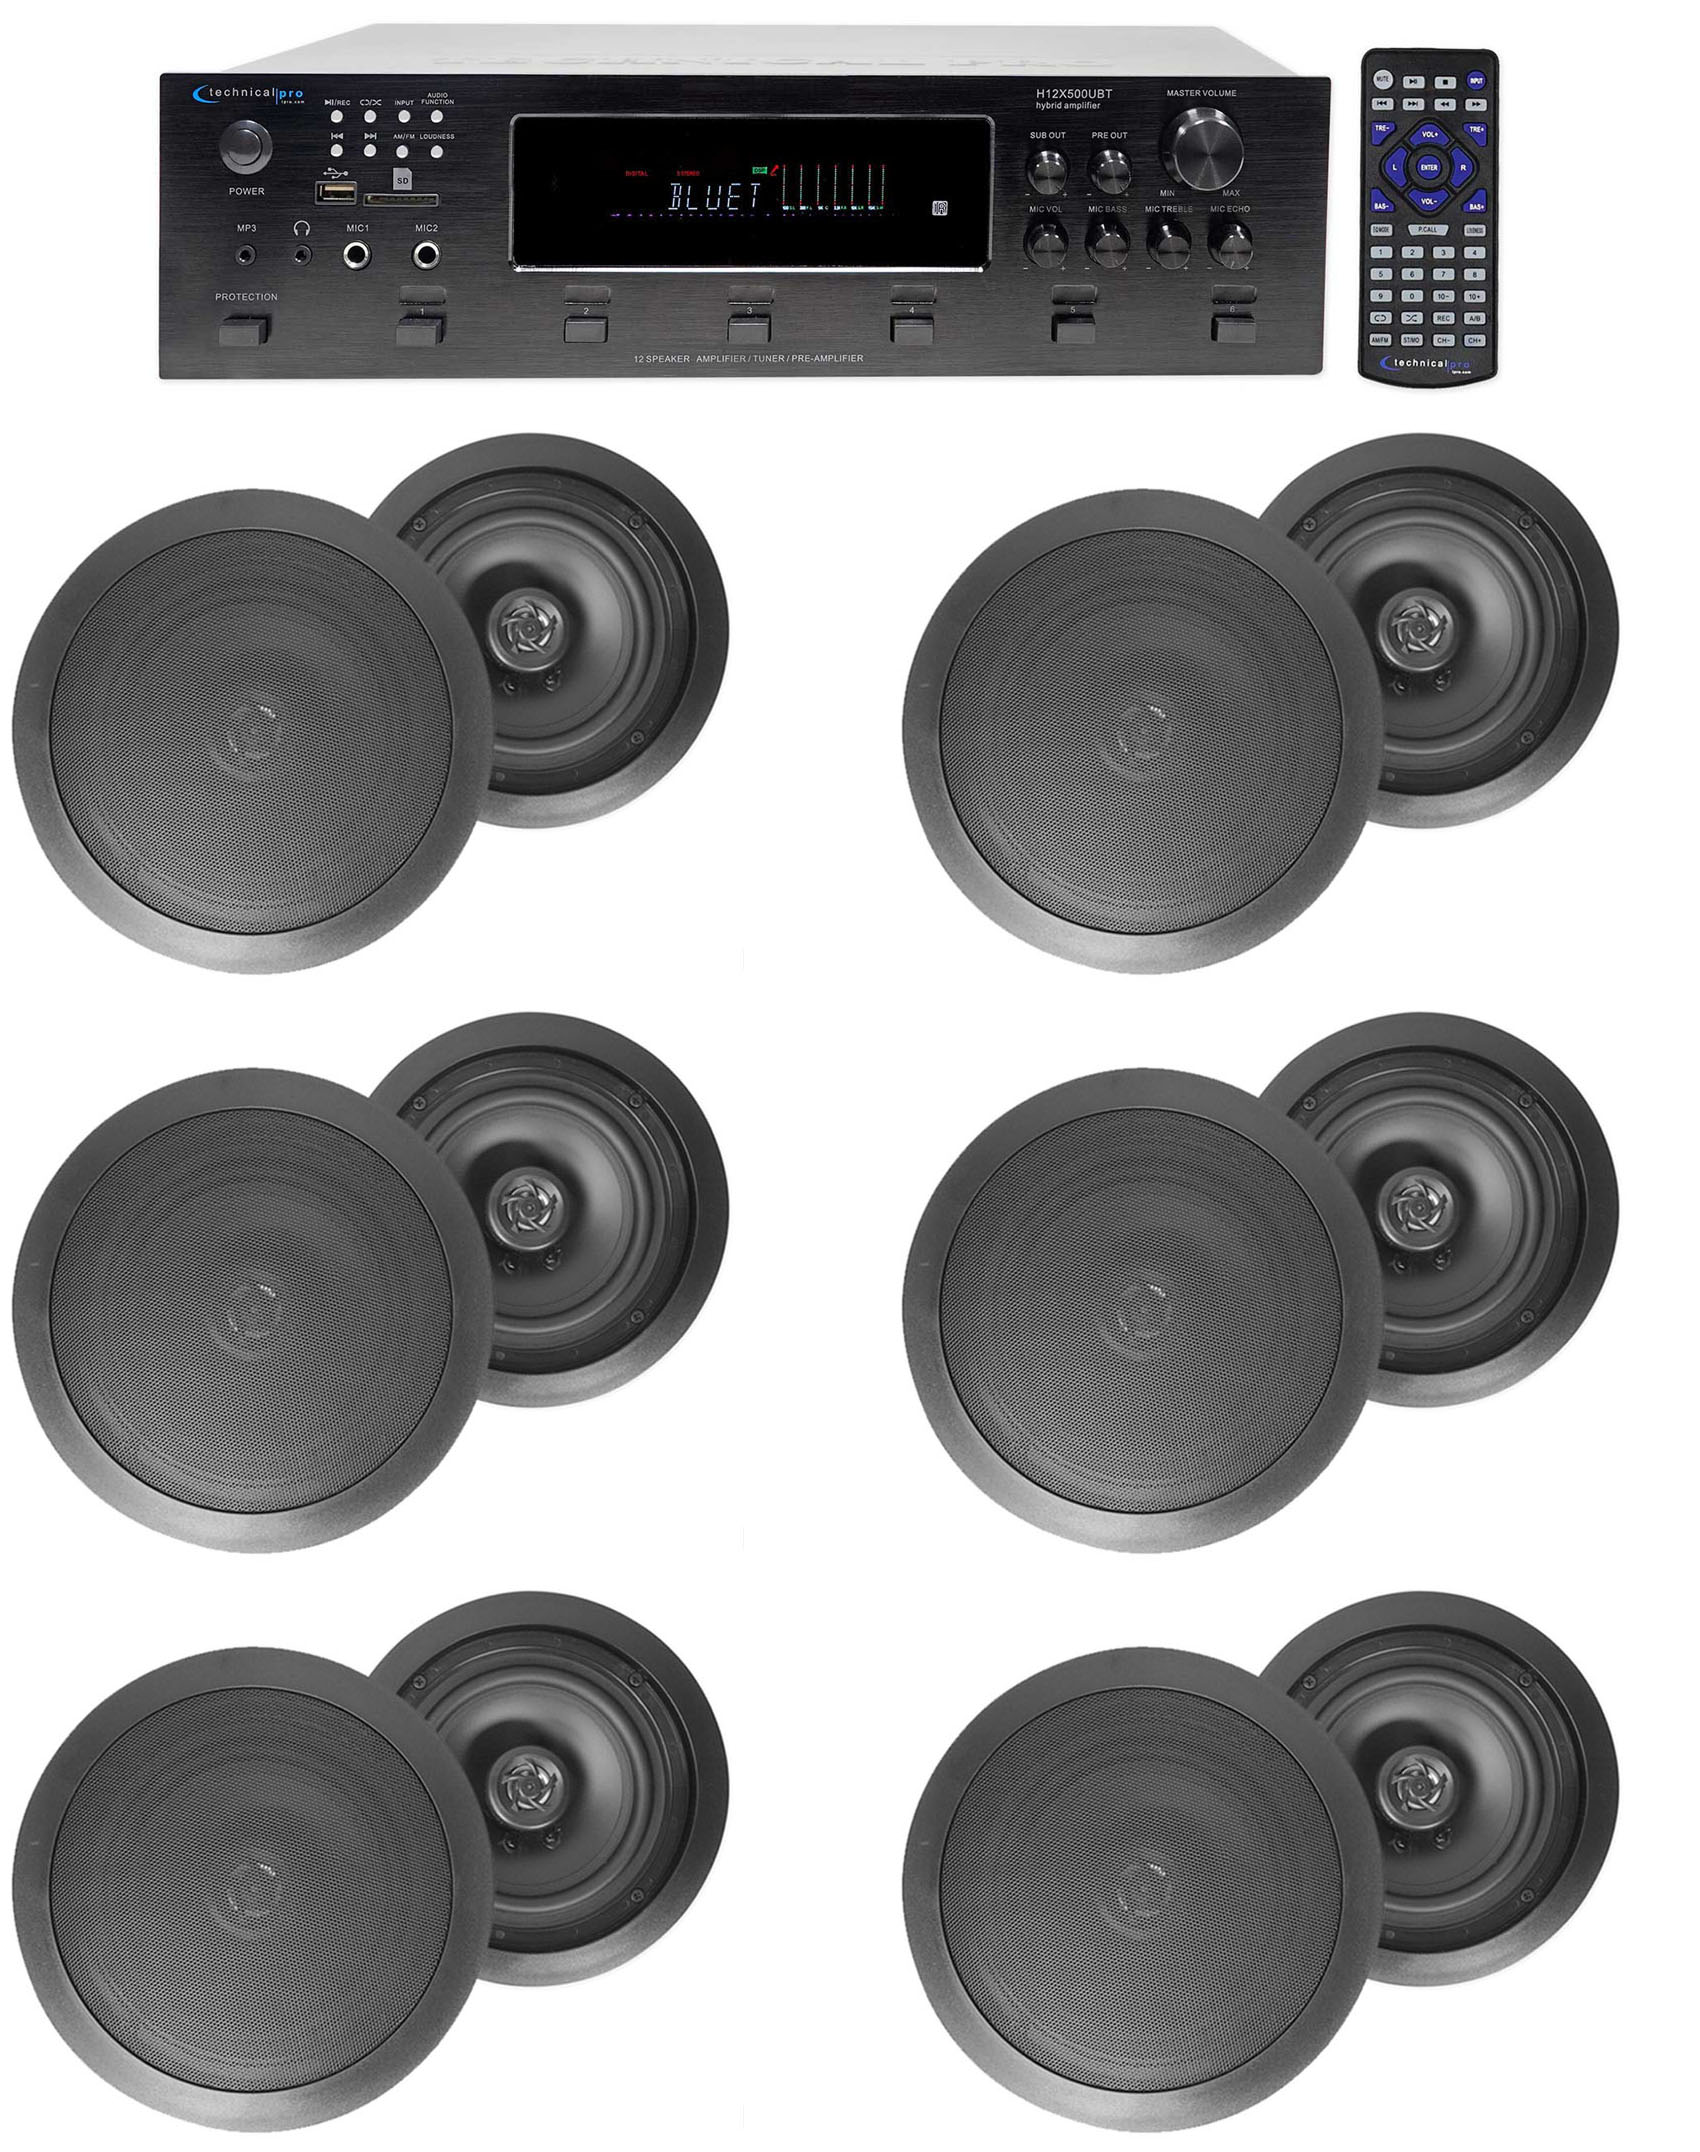 Details About 6000w 6 Zone Home Theater Bluetooth Receiver 12 Black 8 Ceiling Speakers